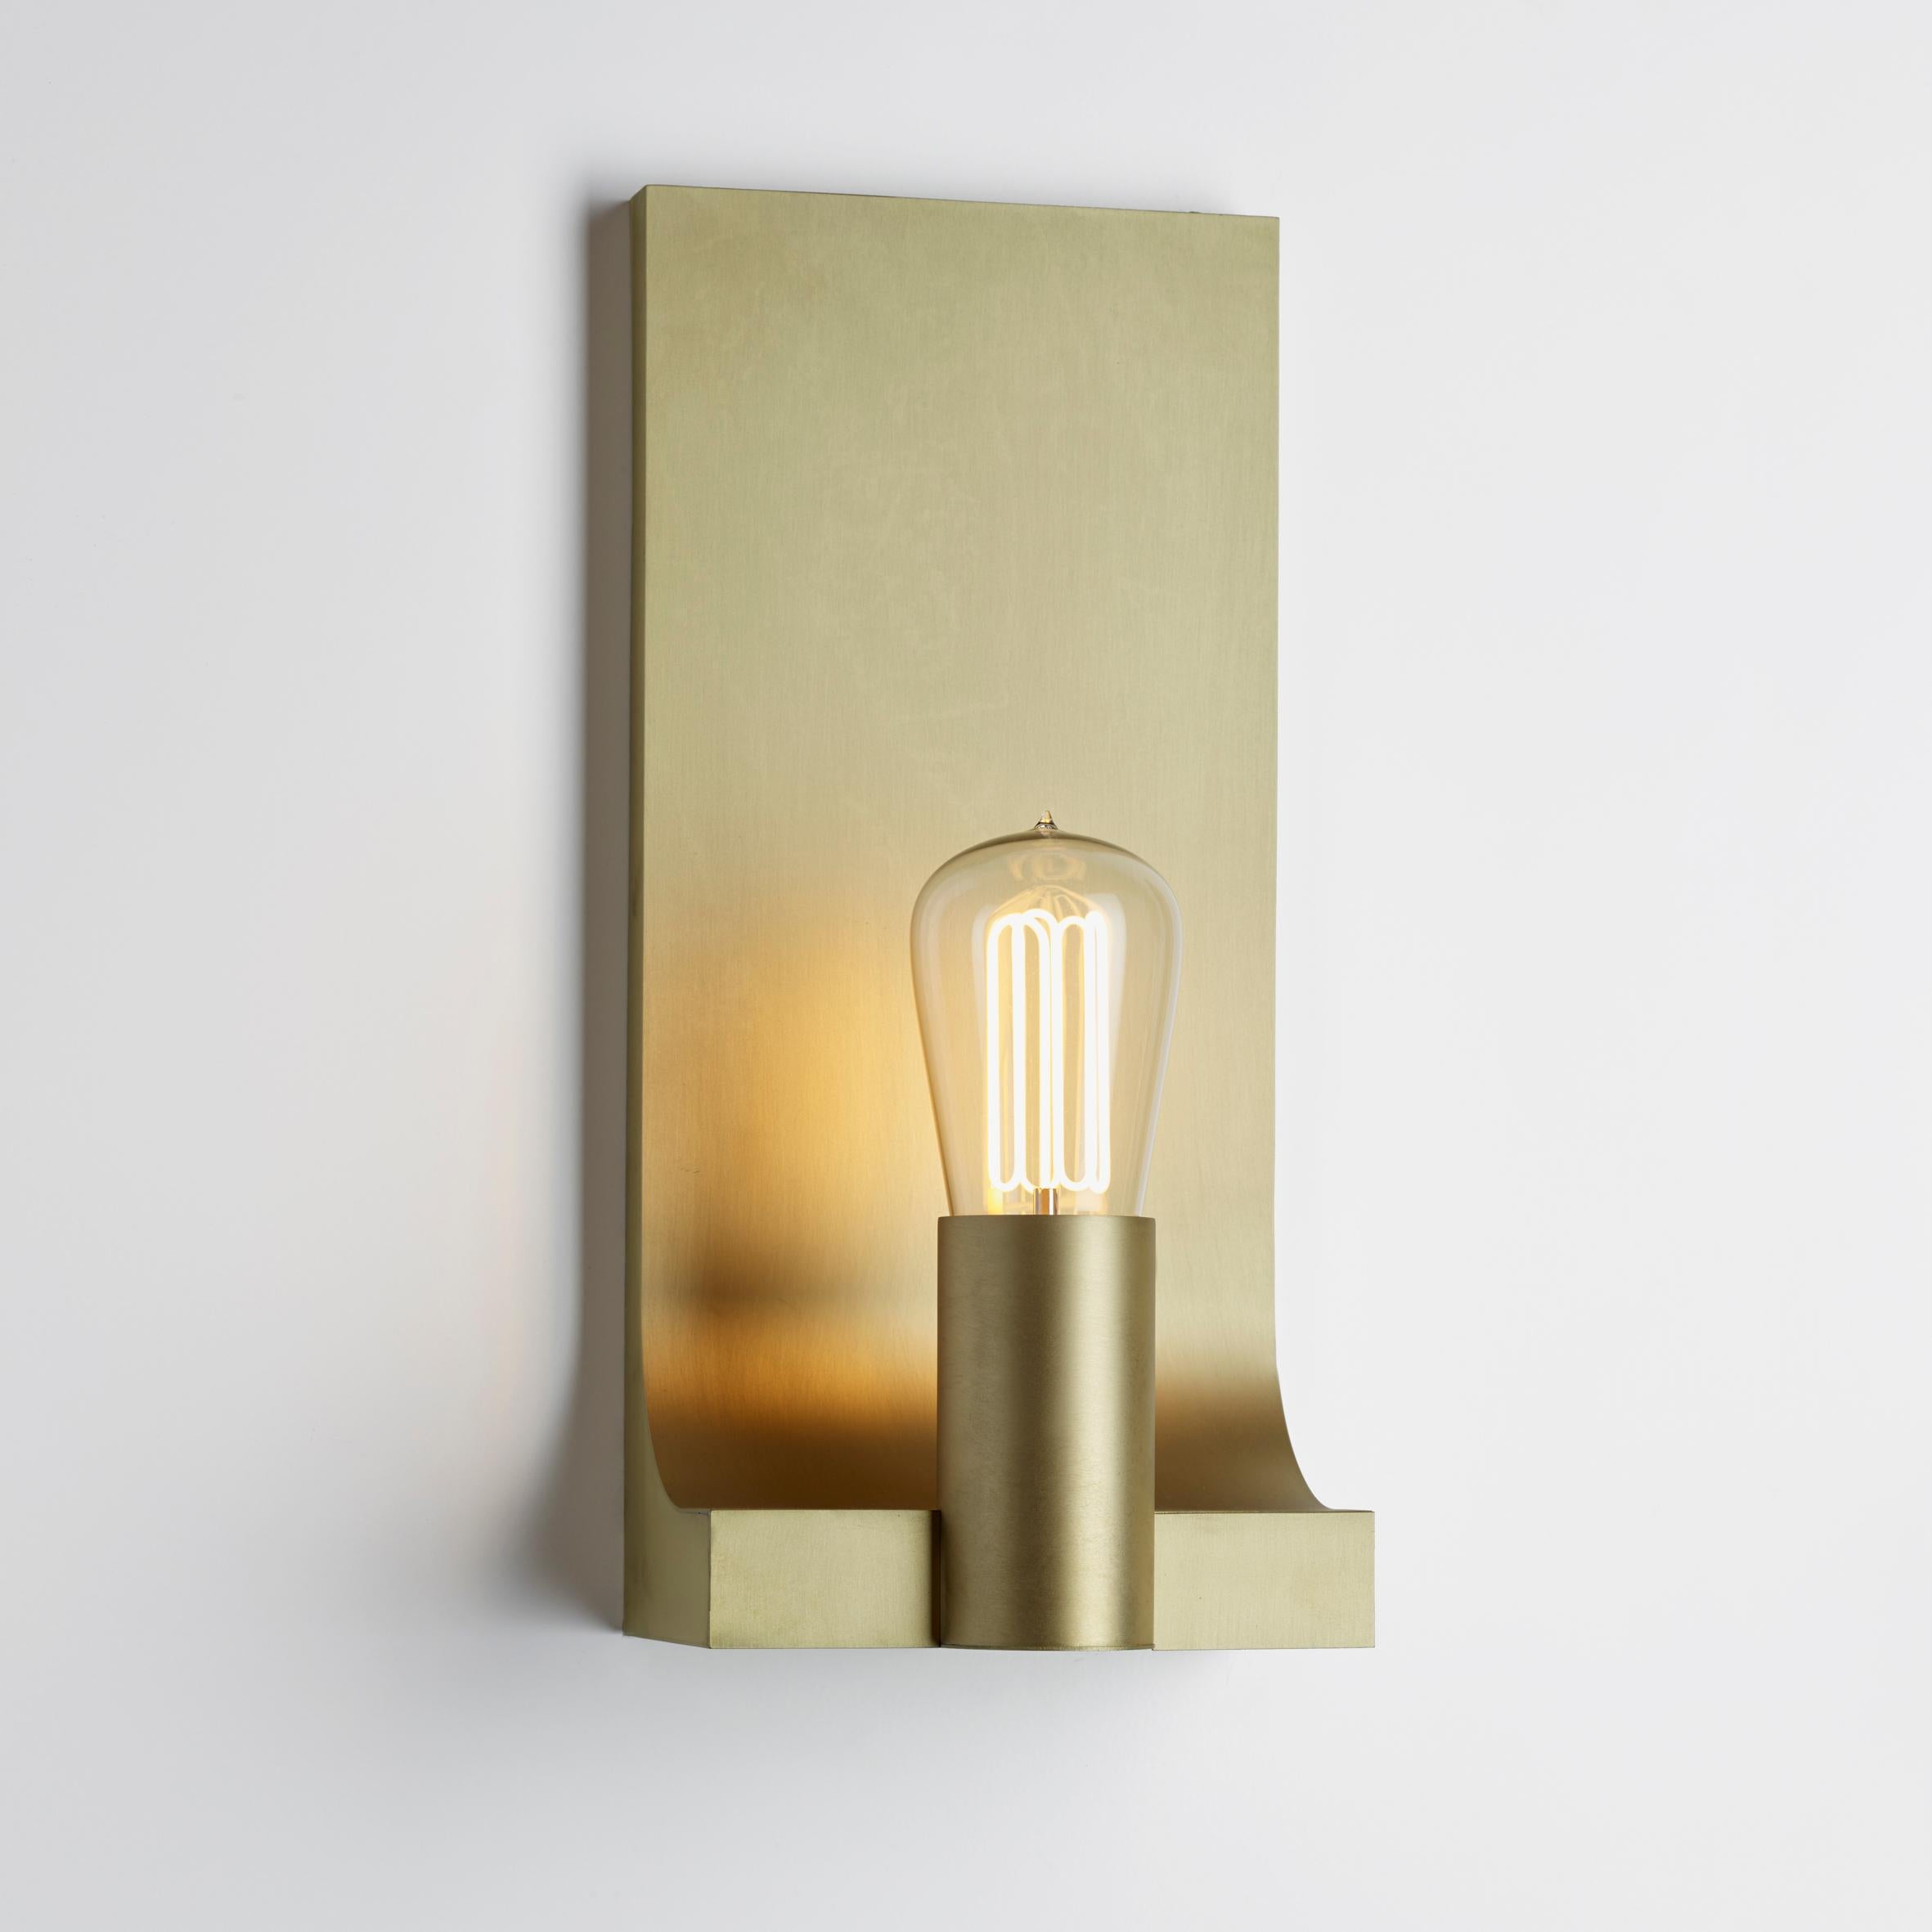 Tekna Walcott Wall Light with Sateen Brass Finish In New Condition For Sale In New York, NY